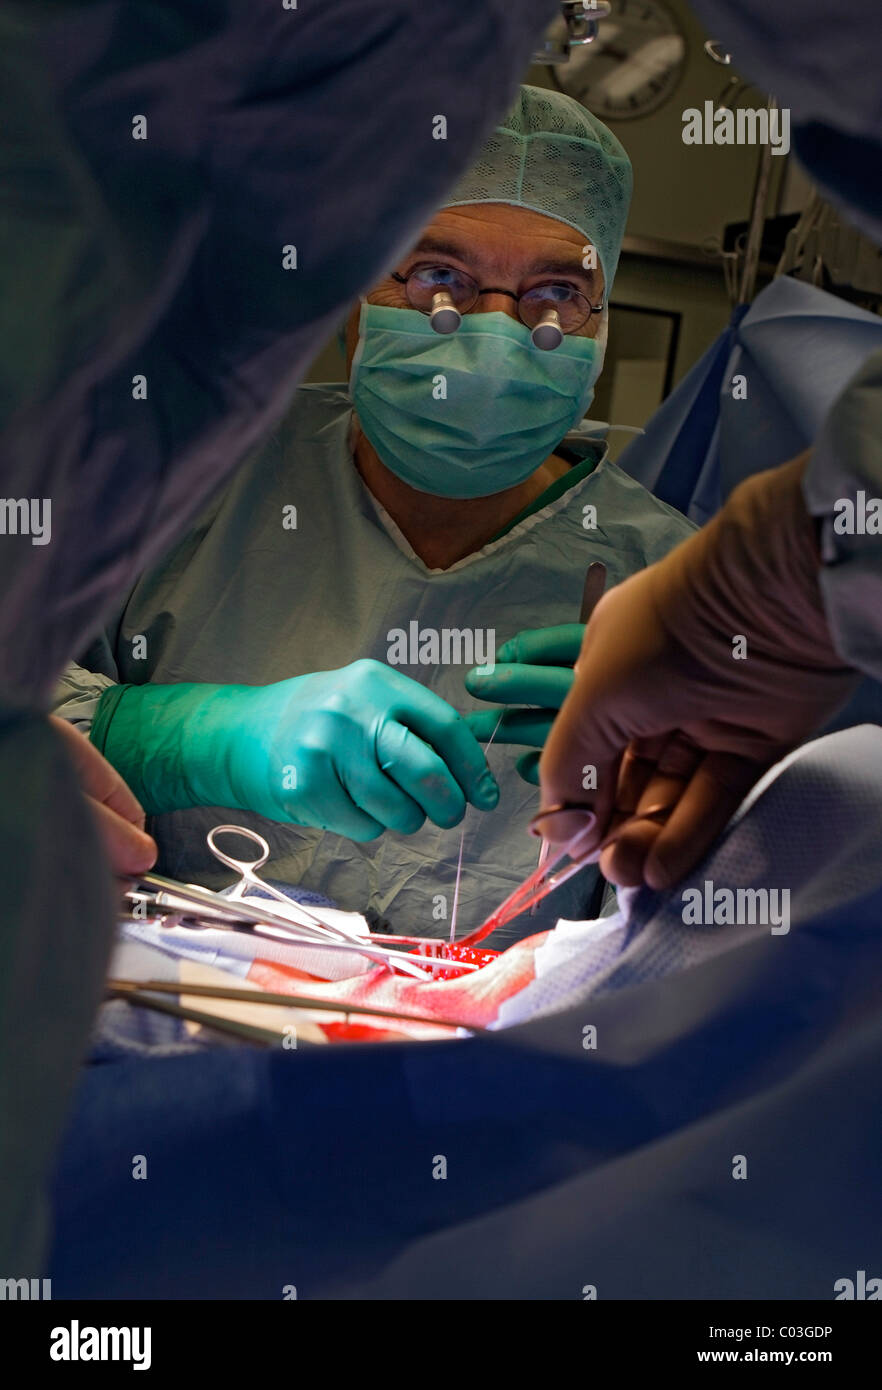 Prof. Dr. med Thomas Hupp sewing the wound after carotid artery surgery at the Klinikum Stuttgart hospital, Stock Photo